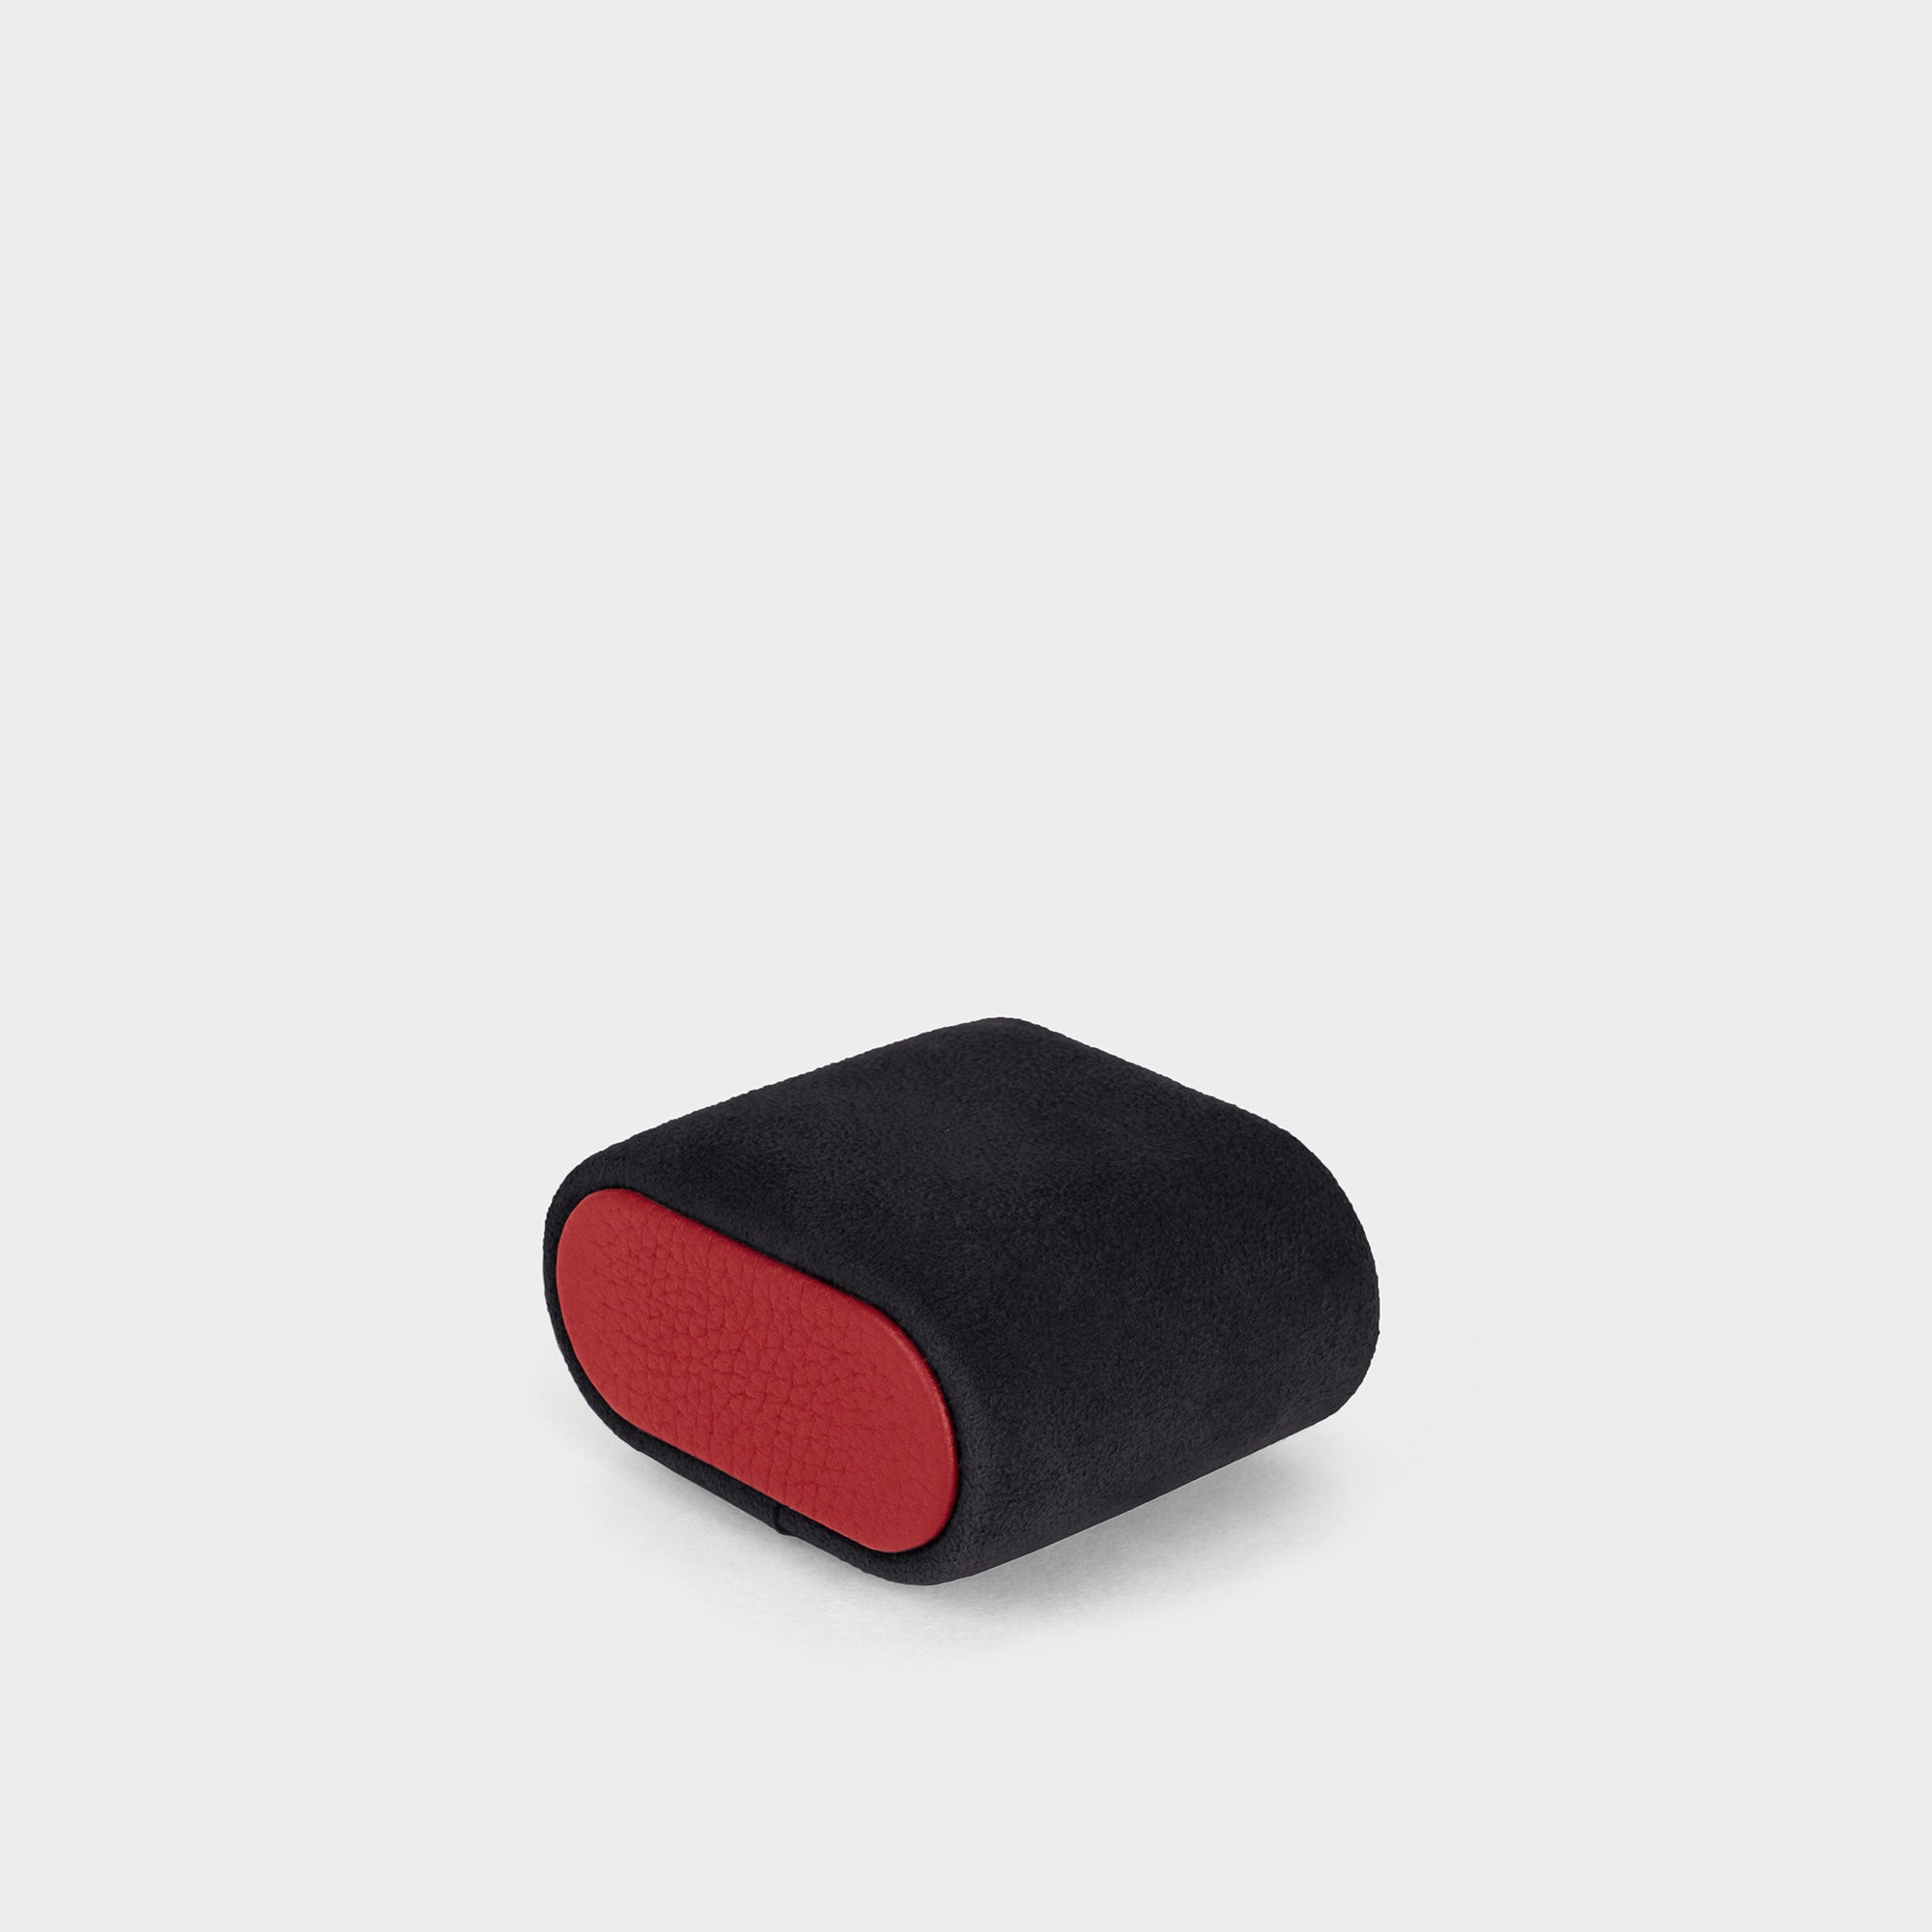 Removable Alcantara watch cushion in Notte Alcantara with contrasting red leather cushion sides